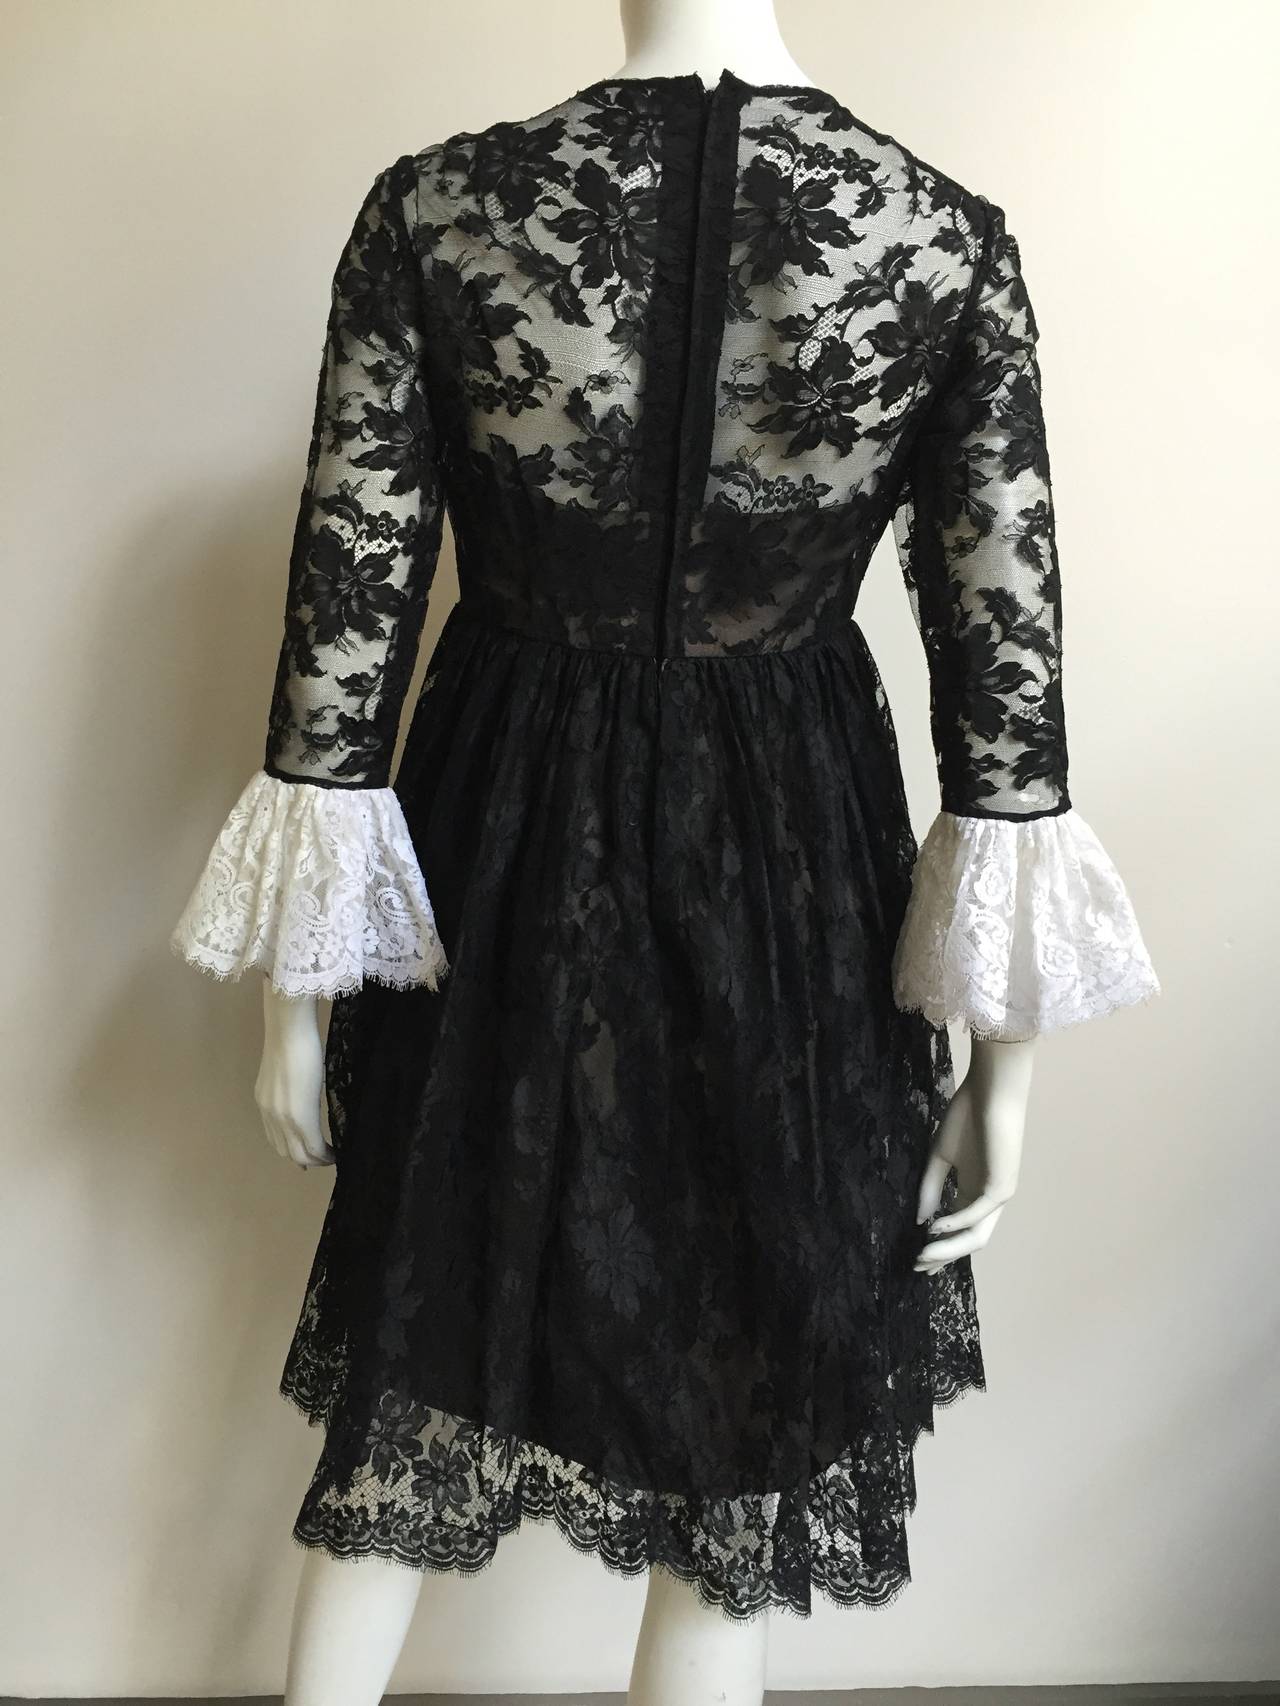 Bill Blass for Maurice Renter Bonwit Teller 60s Lace Evening Dress Size 6. In Good Condition For Sale In Atlanta, GA